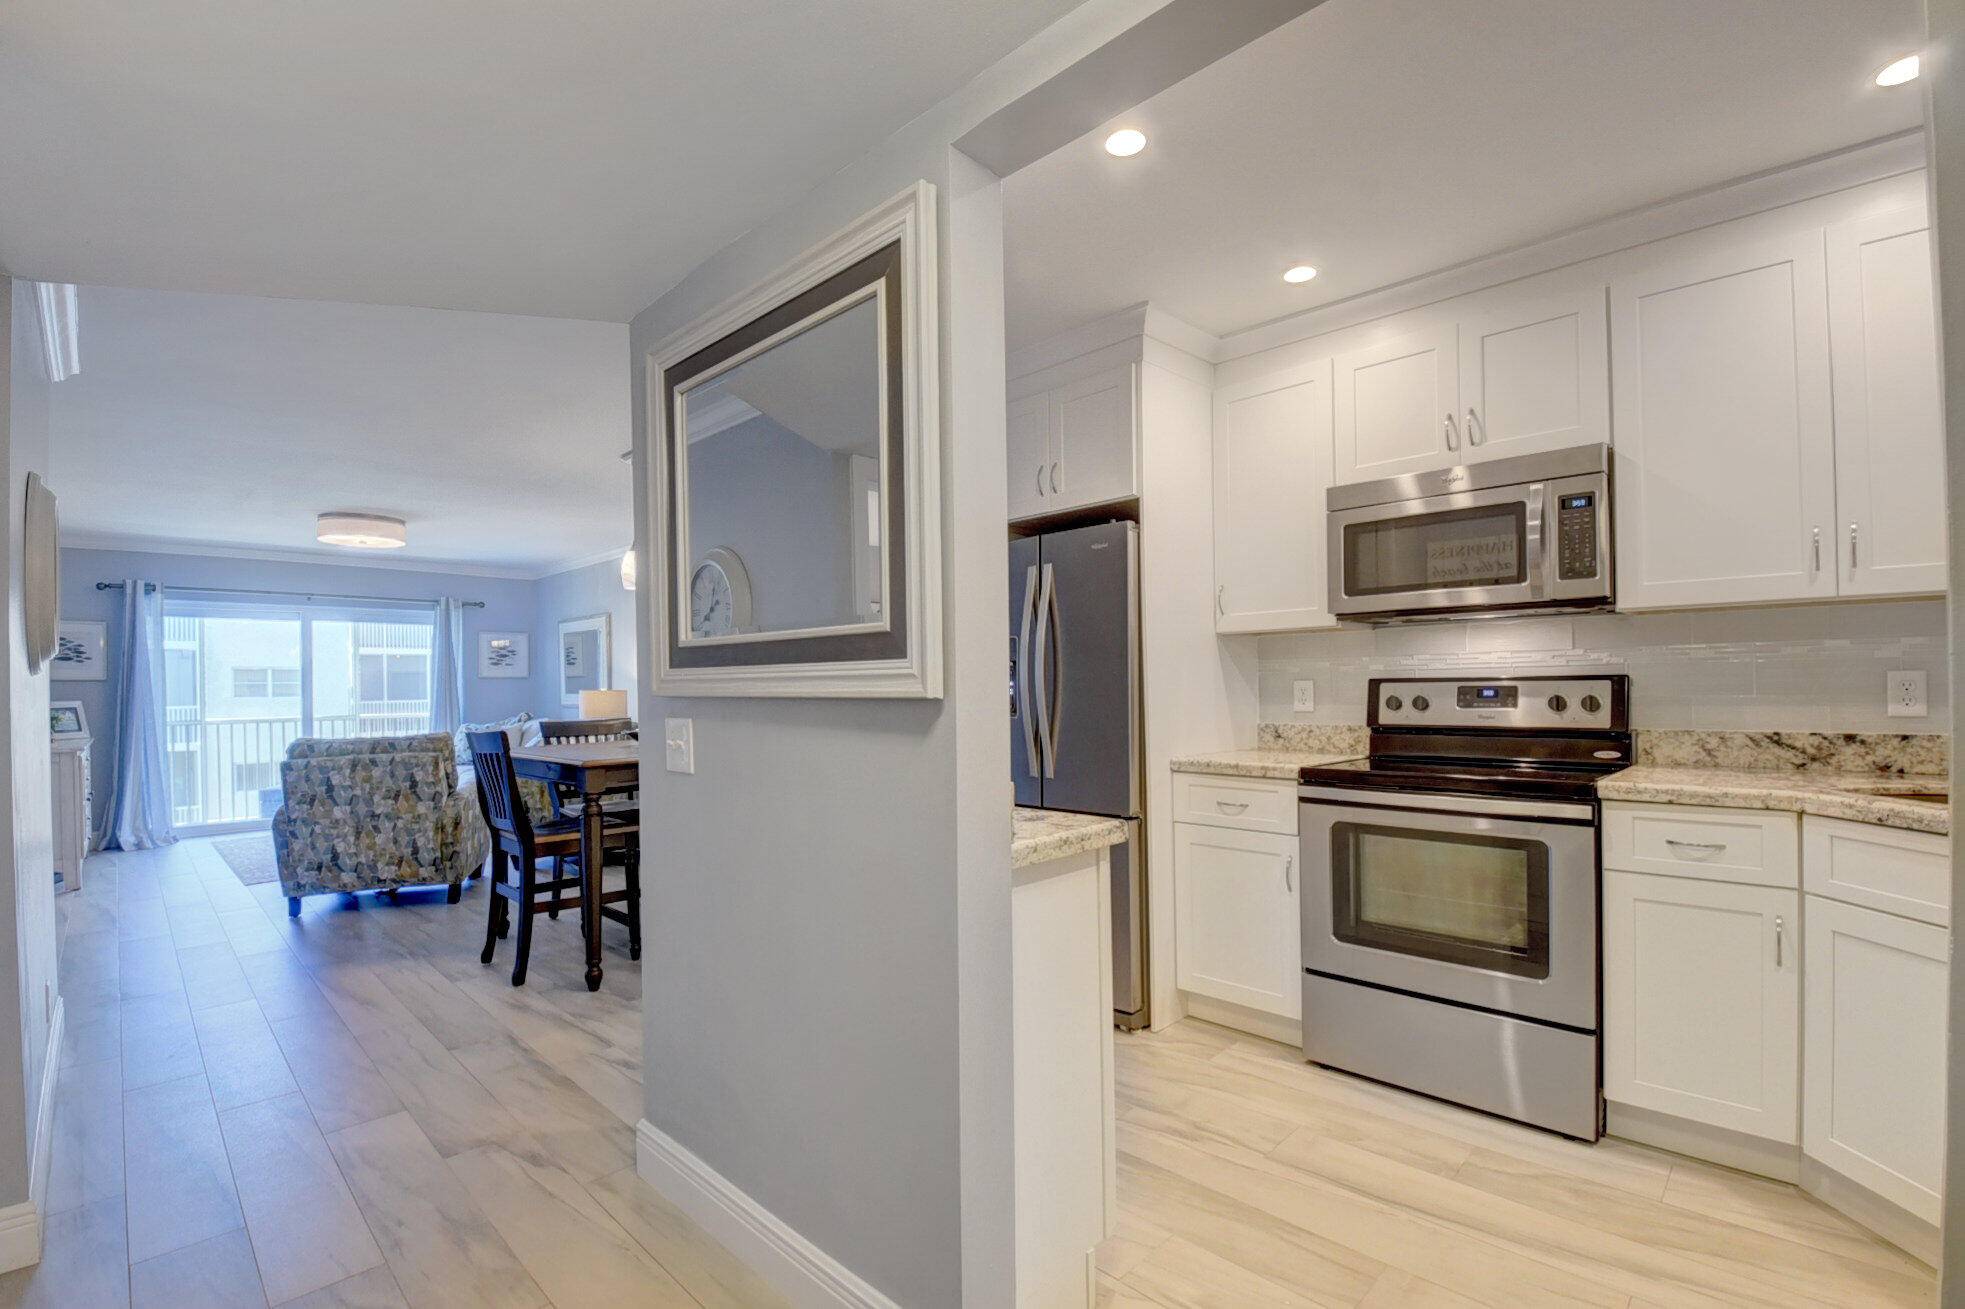 Available for rent ! Completely updated, open style kitchen and SS appliances, granite countertops, all impact windows, remodeled baths, wood look porcelain tiles throughout, smooth ceilings with crown moldings.